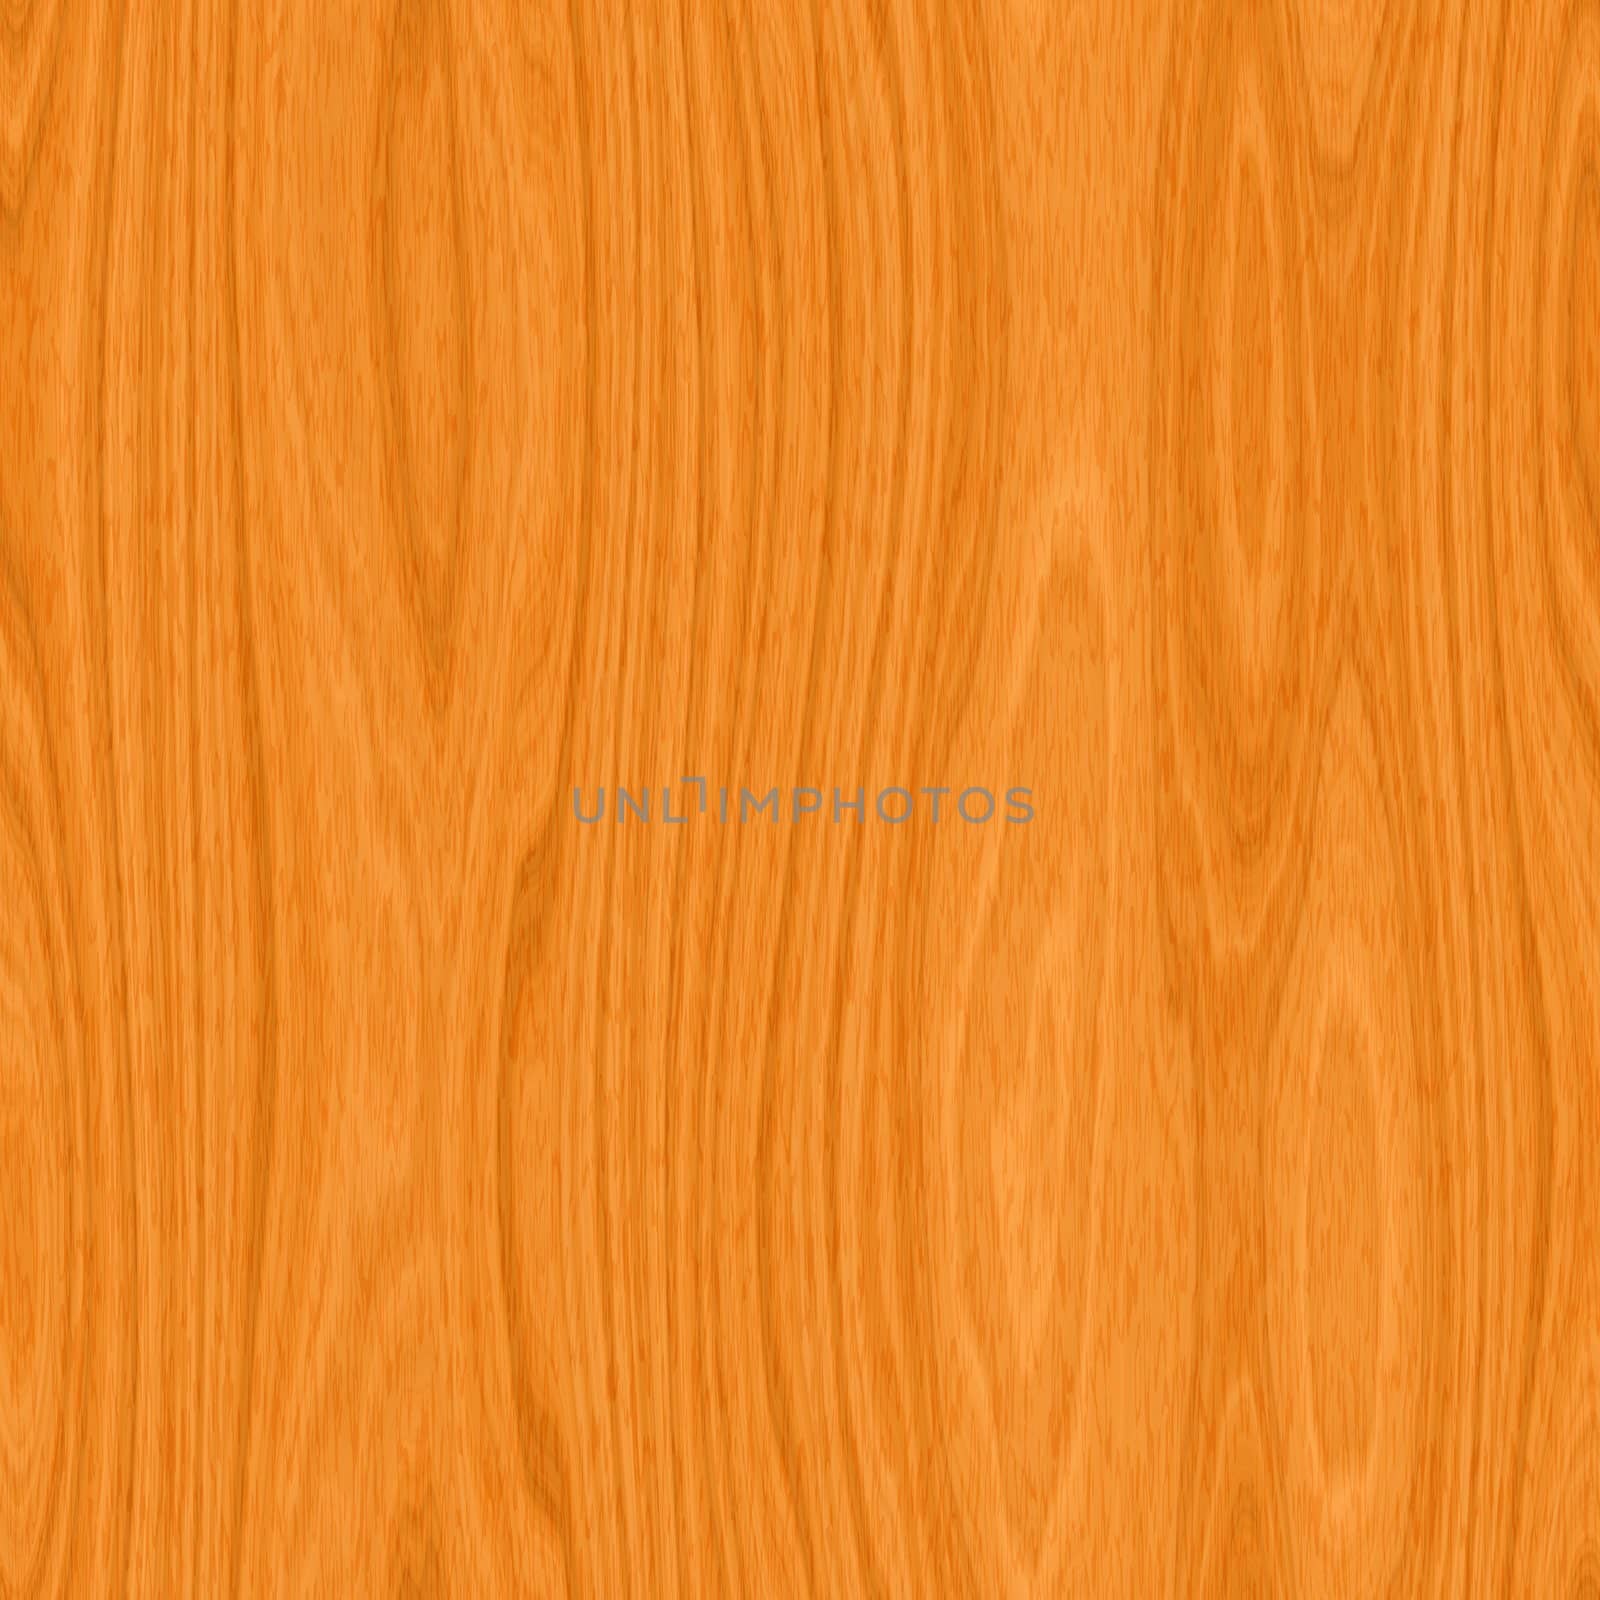 a nice large image of pine wood texture